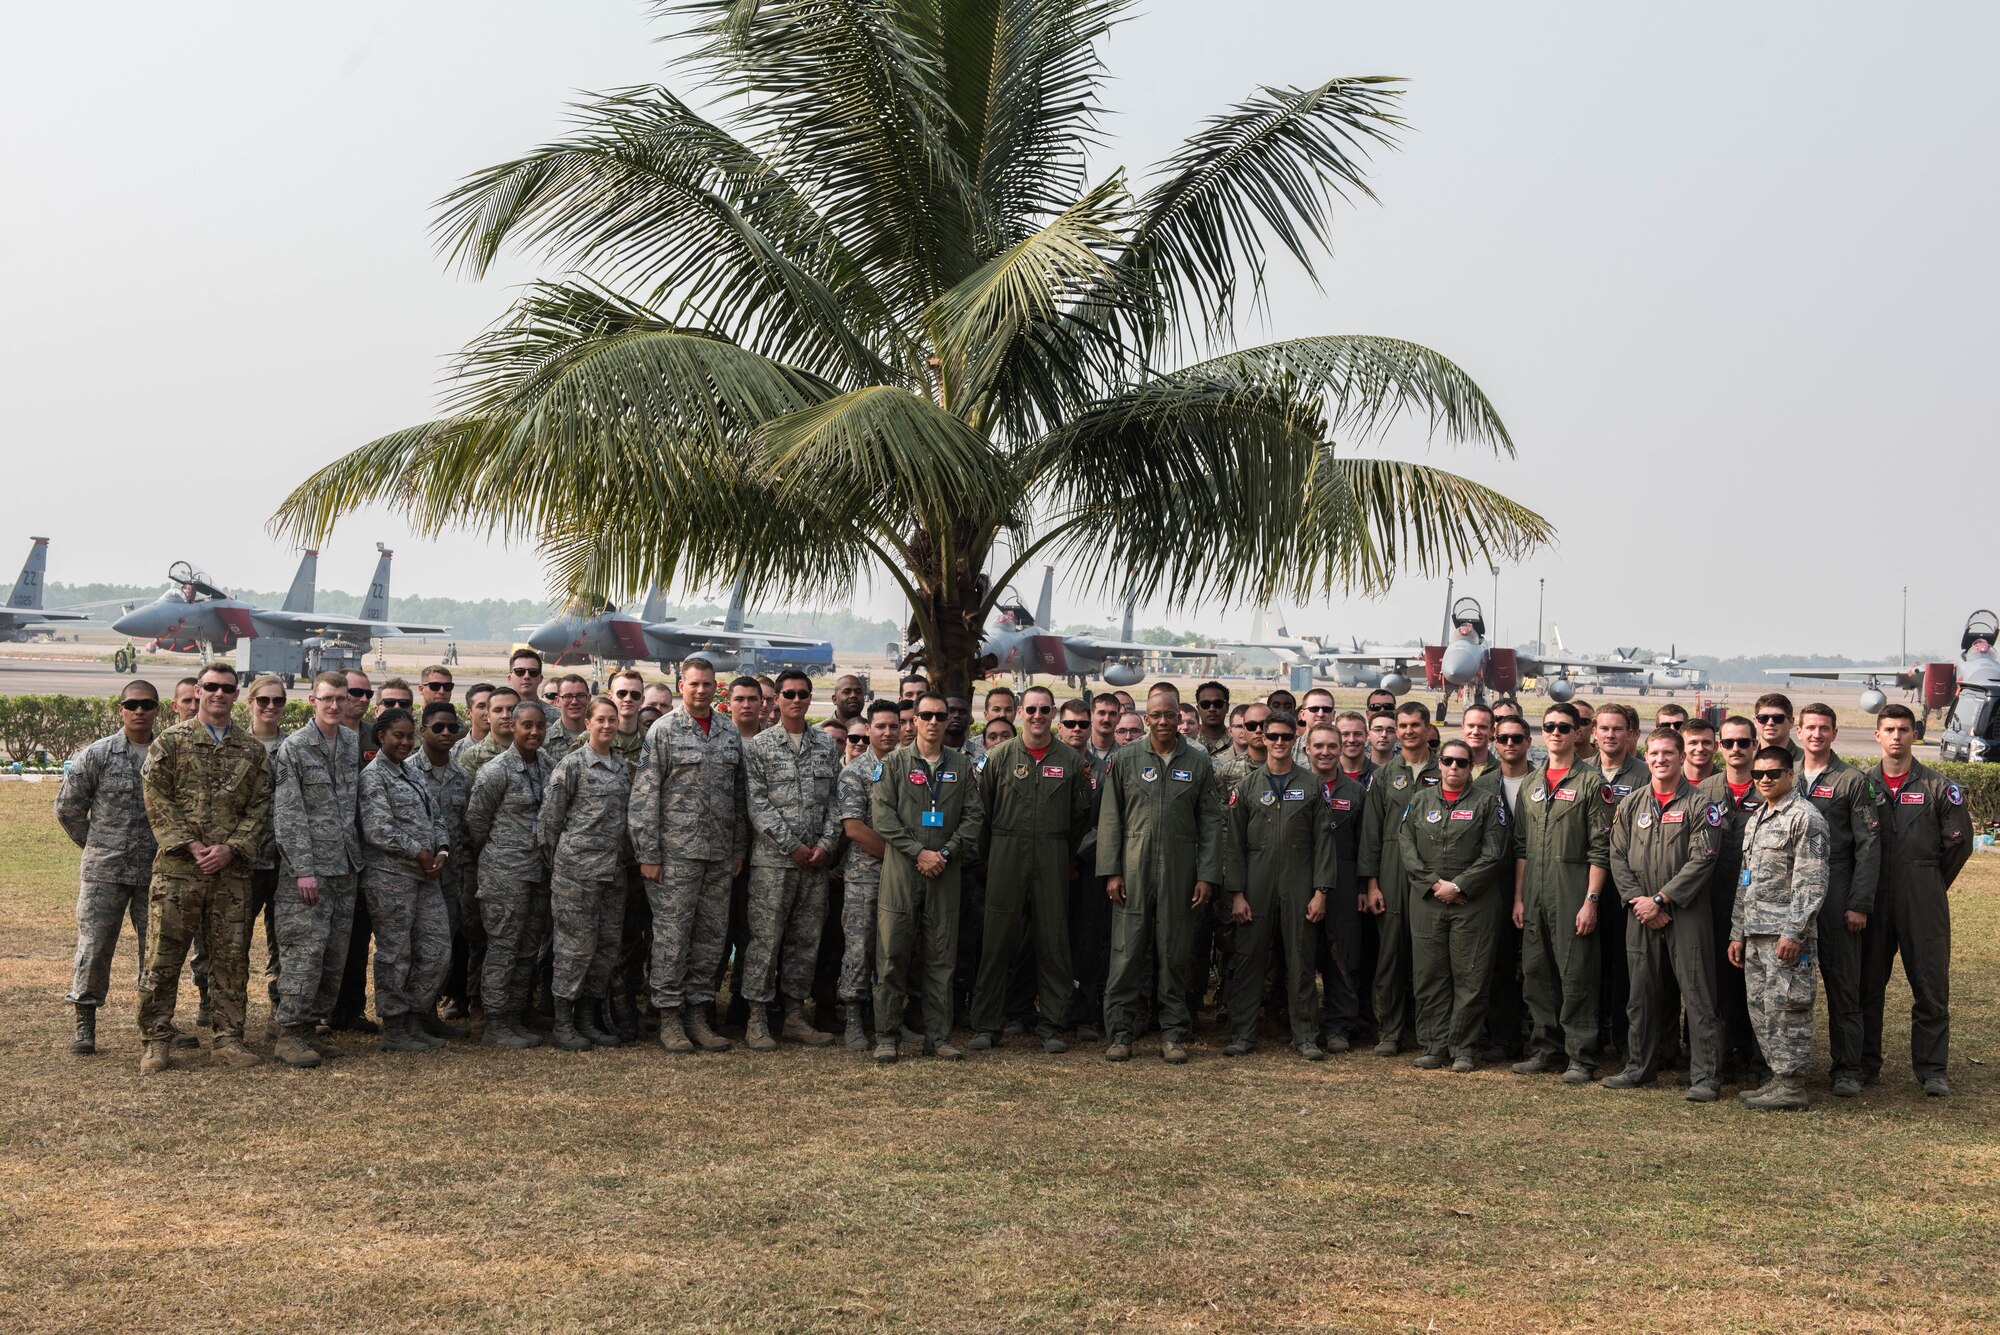 U.S. Air Force Gen. CQ Brown Jr., Pacific Air Forces commander, takes a group photo with Airmen from Kadena Air Base, Japan and the Illinois Air National Guard at Cope India 19 at Kalaikunda Air Force Station, India, Dec. 14,